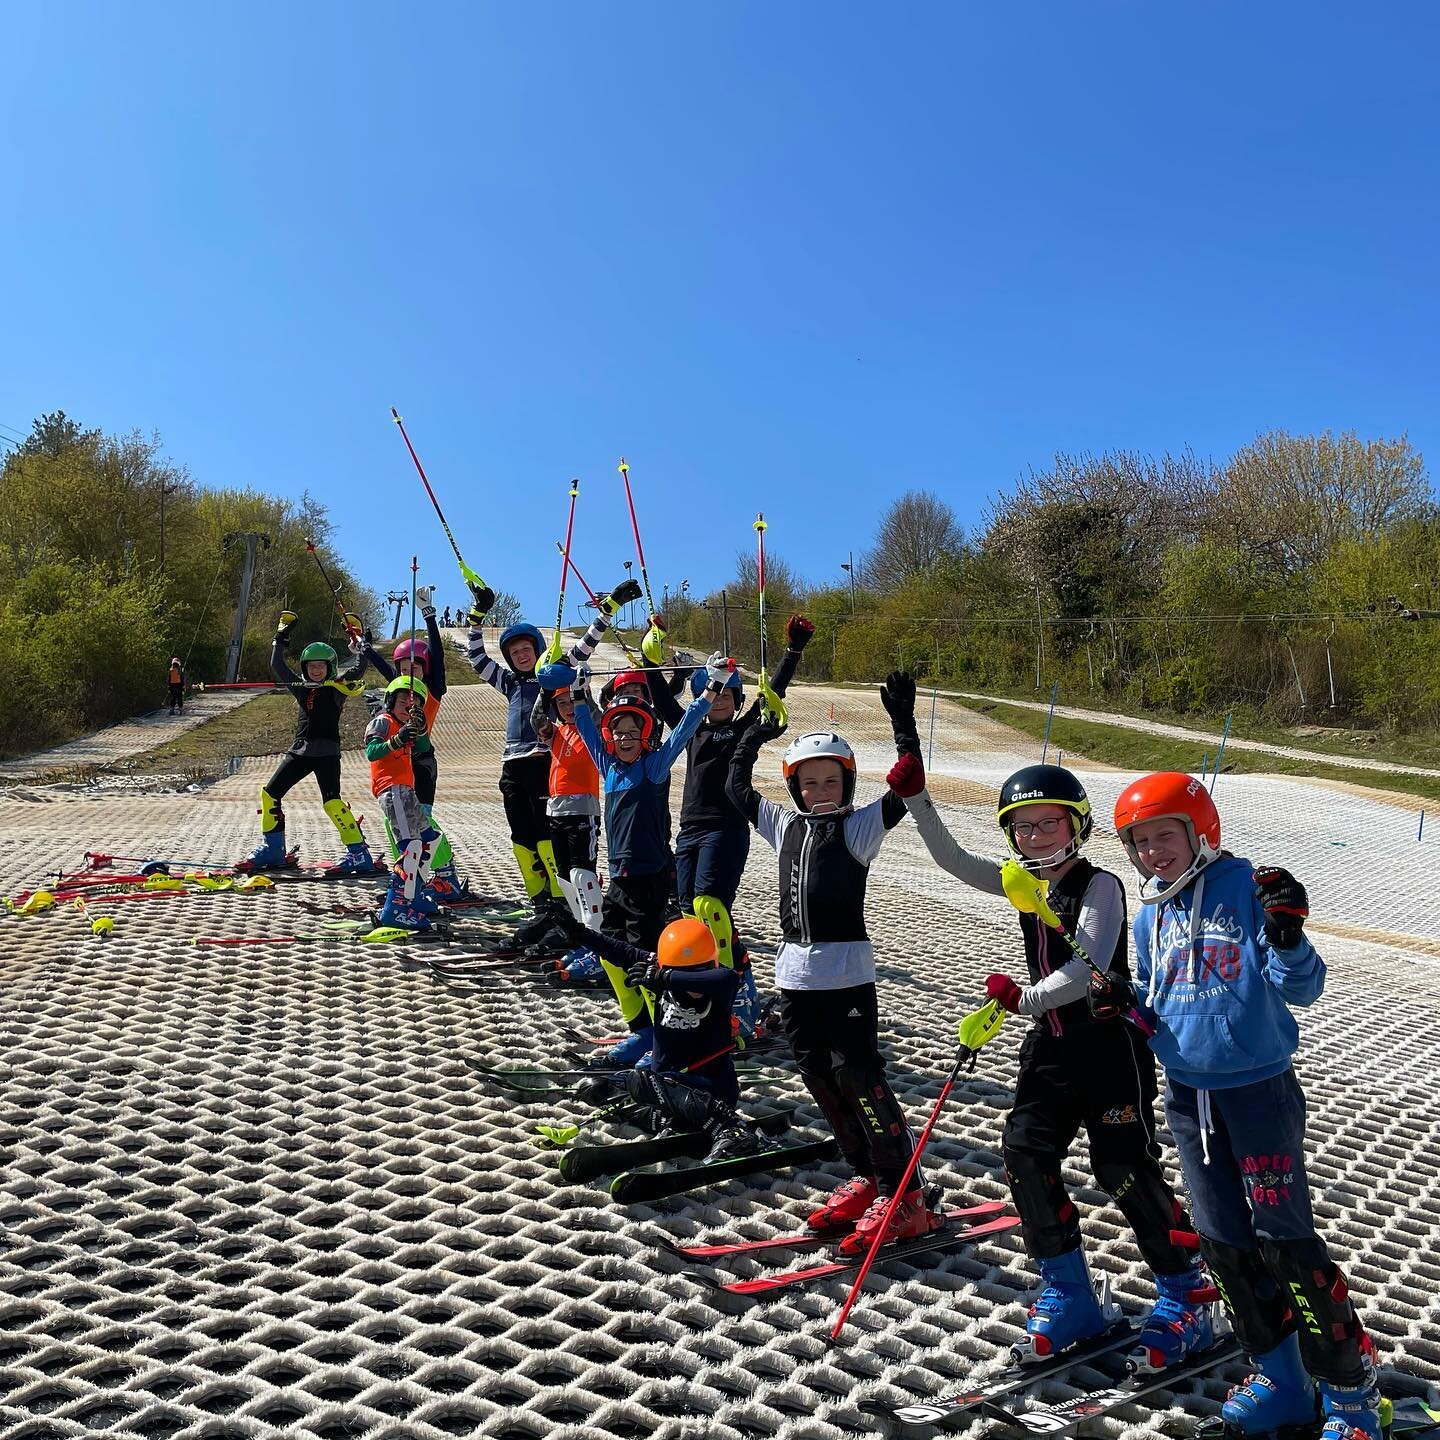 ❄️CHATHAM 26&ndash;28 JULY 2021 ❄️

Just 2 weeks to go until we are back at one of our favourite dry slope venues! 
👌🏽

We have limited spaces available so if you are thinking of joining us for our first summer dry slope camp, head to the website t